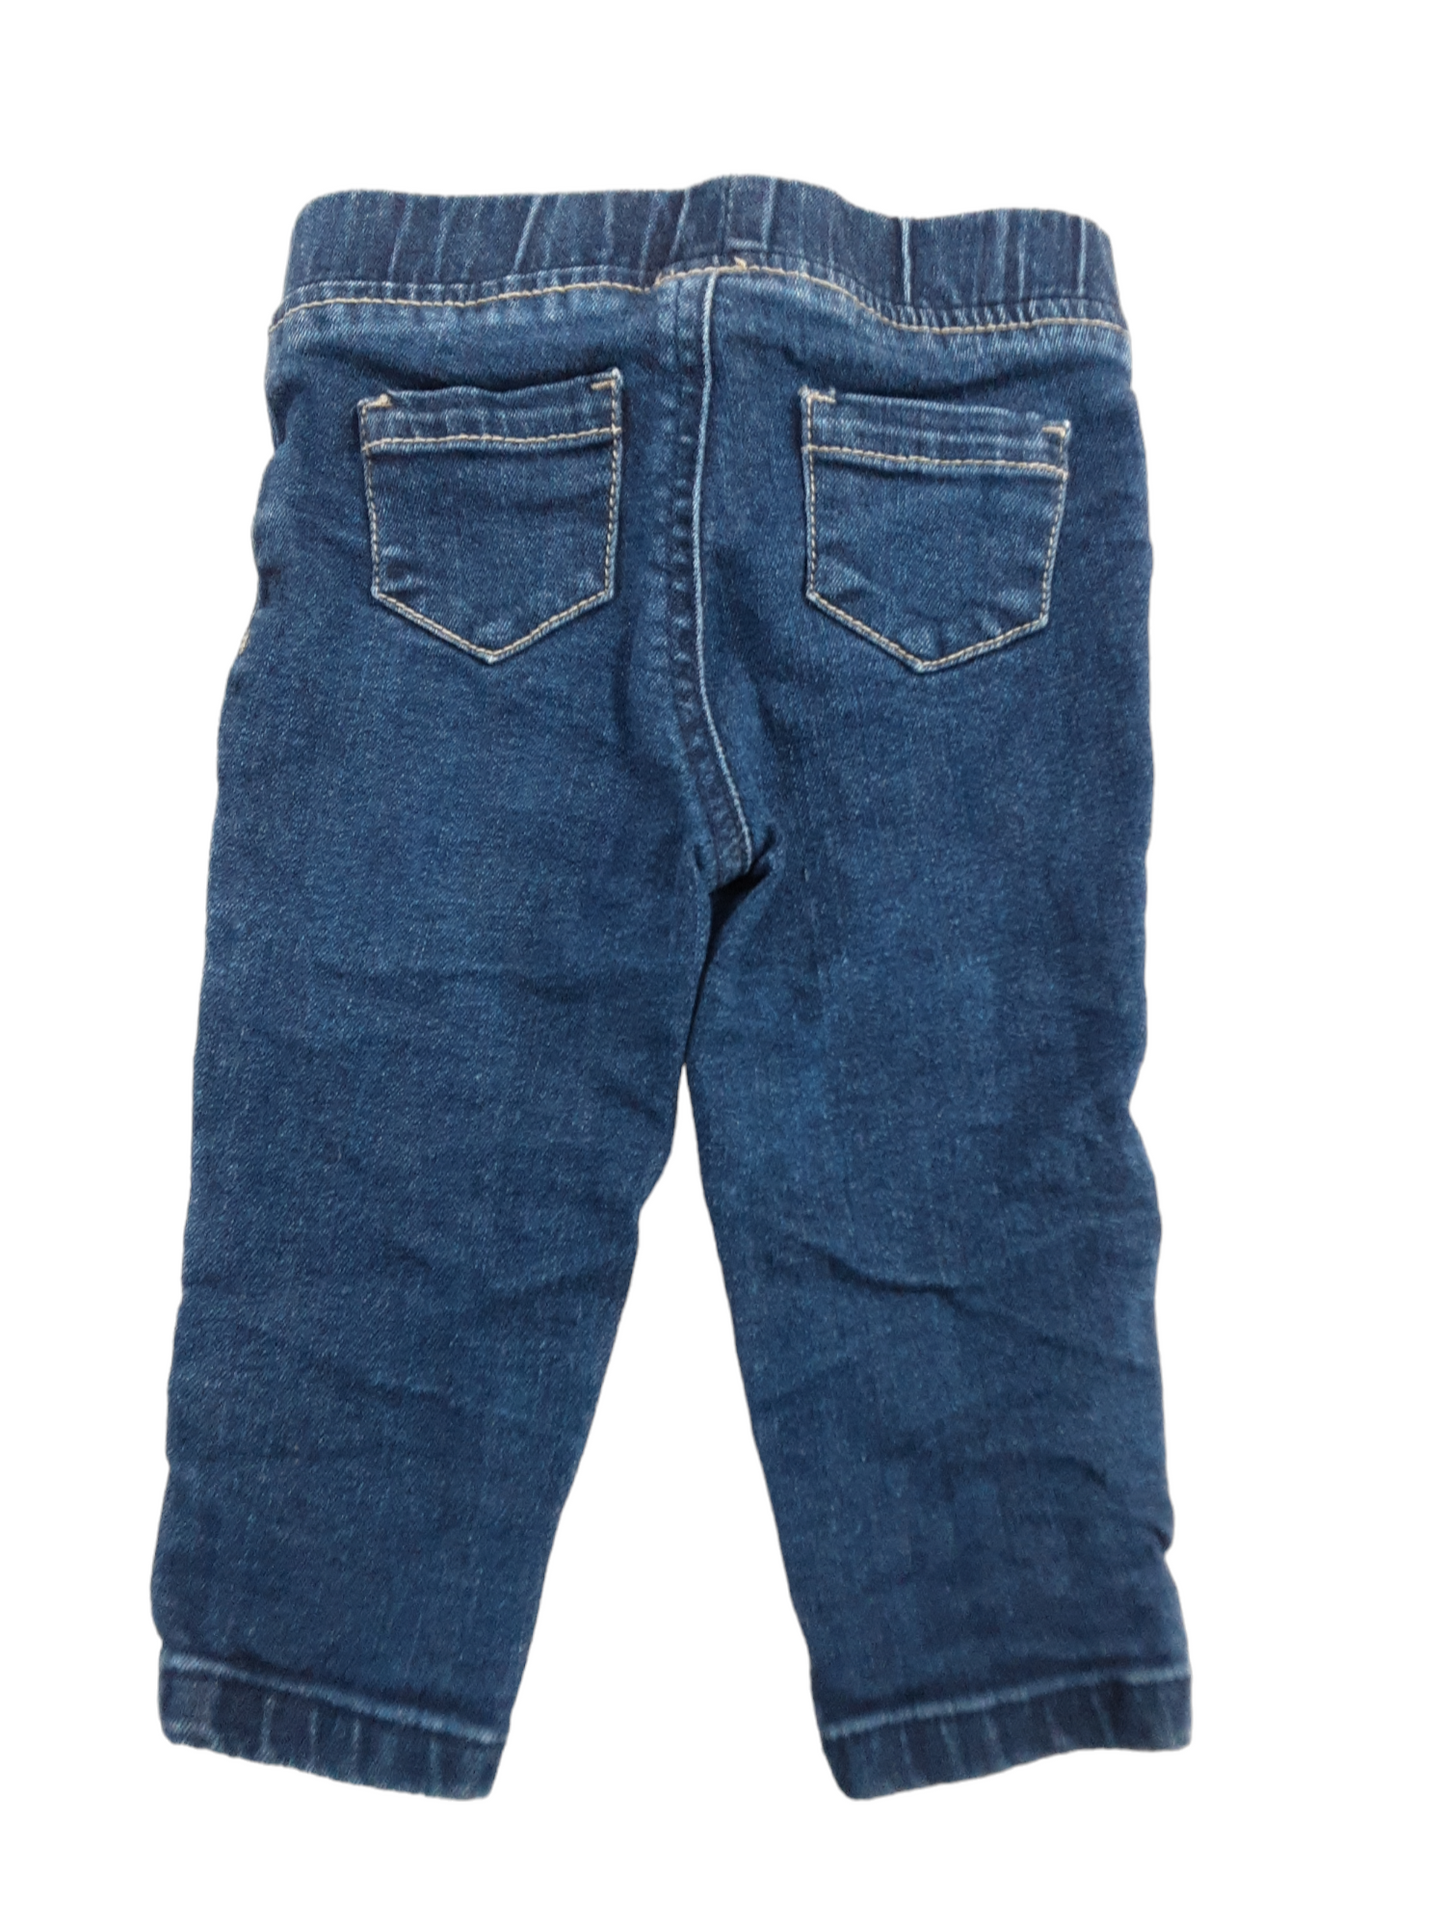 Pull on denims size 12months